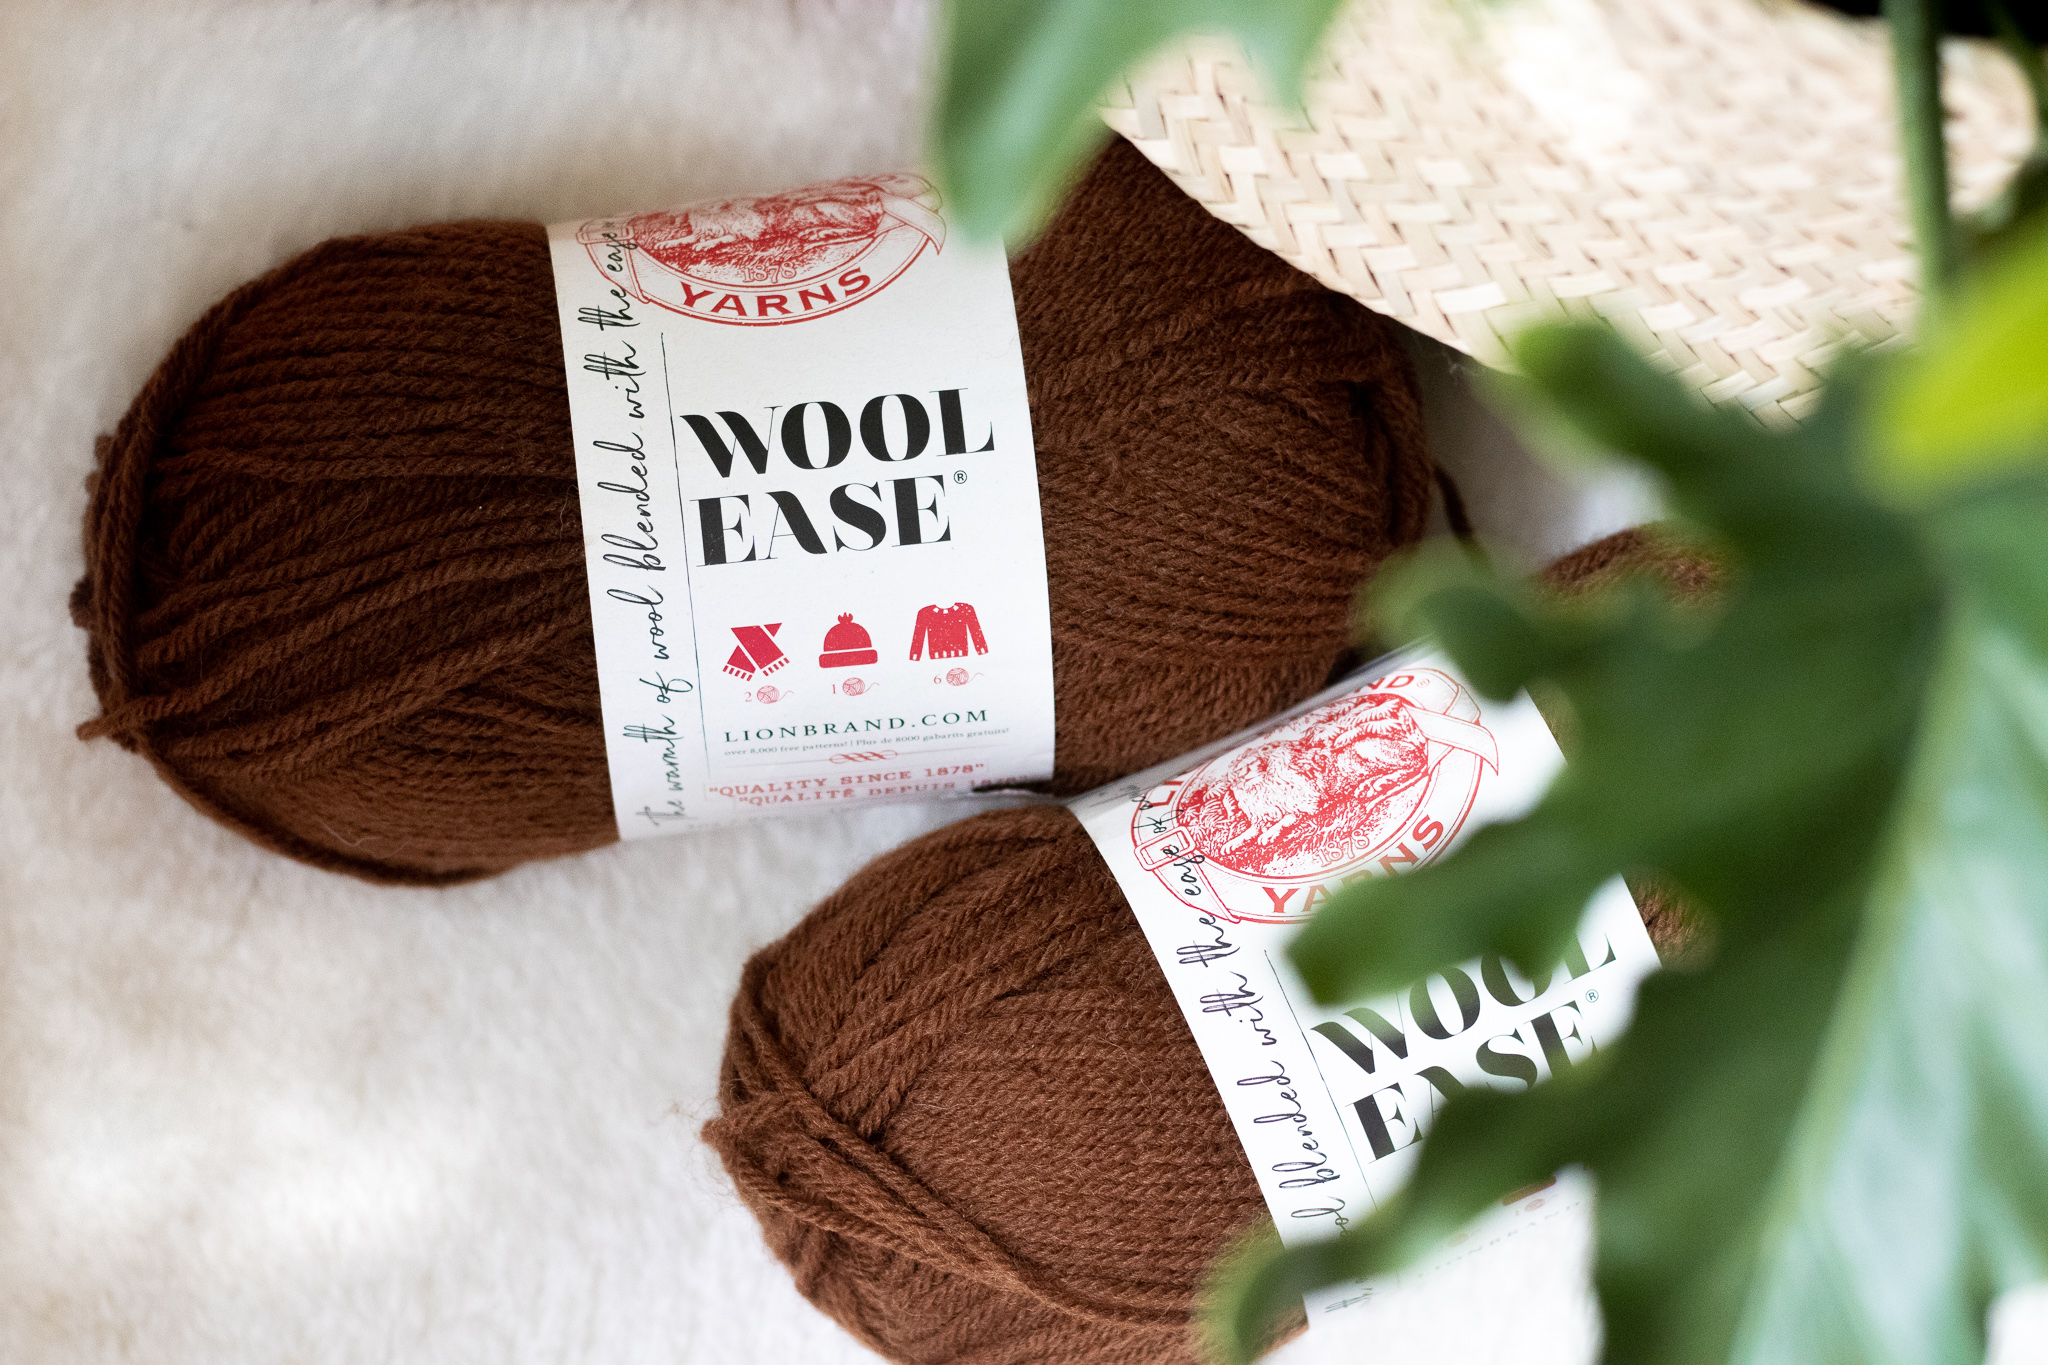 The Warmth of Wool with the Ease of Acrylic - Wool-Ease® Thick & Quick®  reviewed 